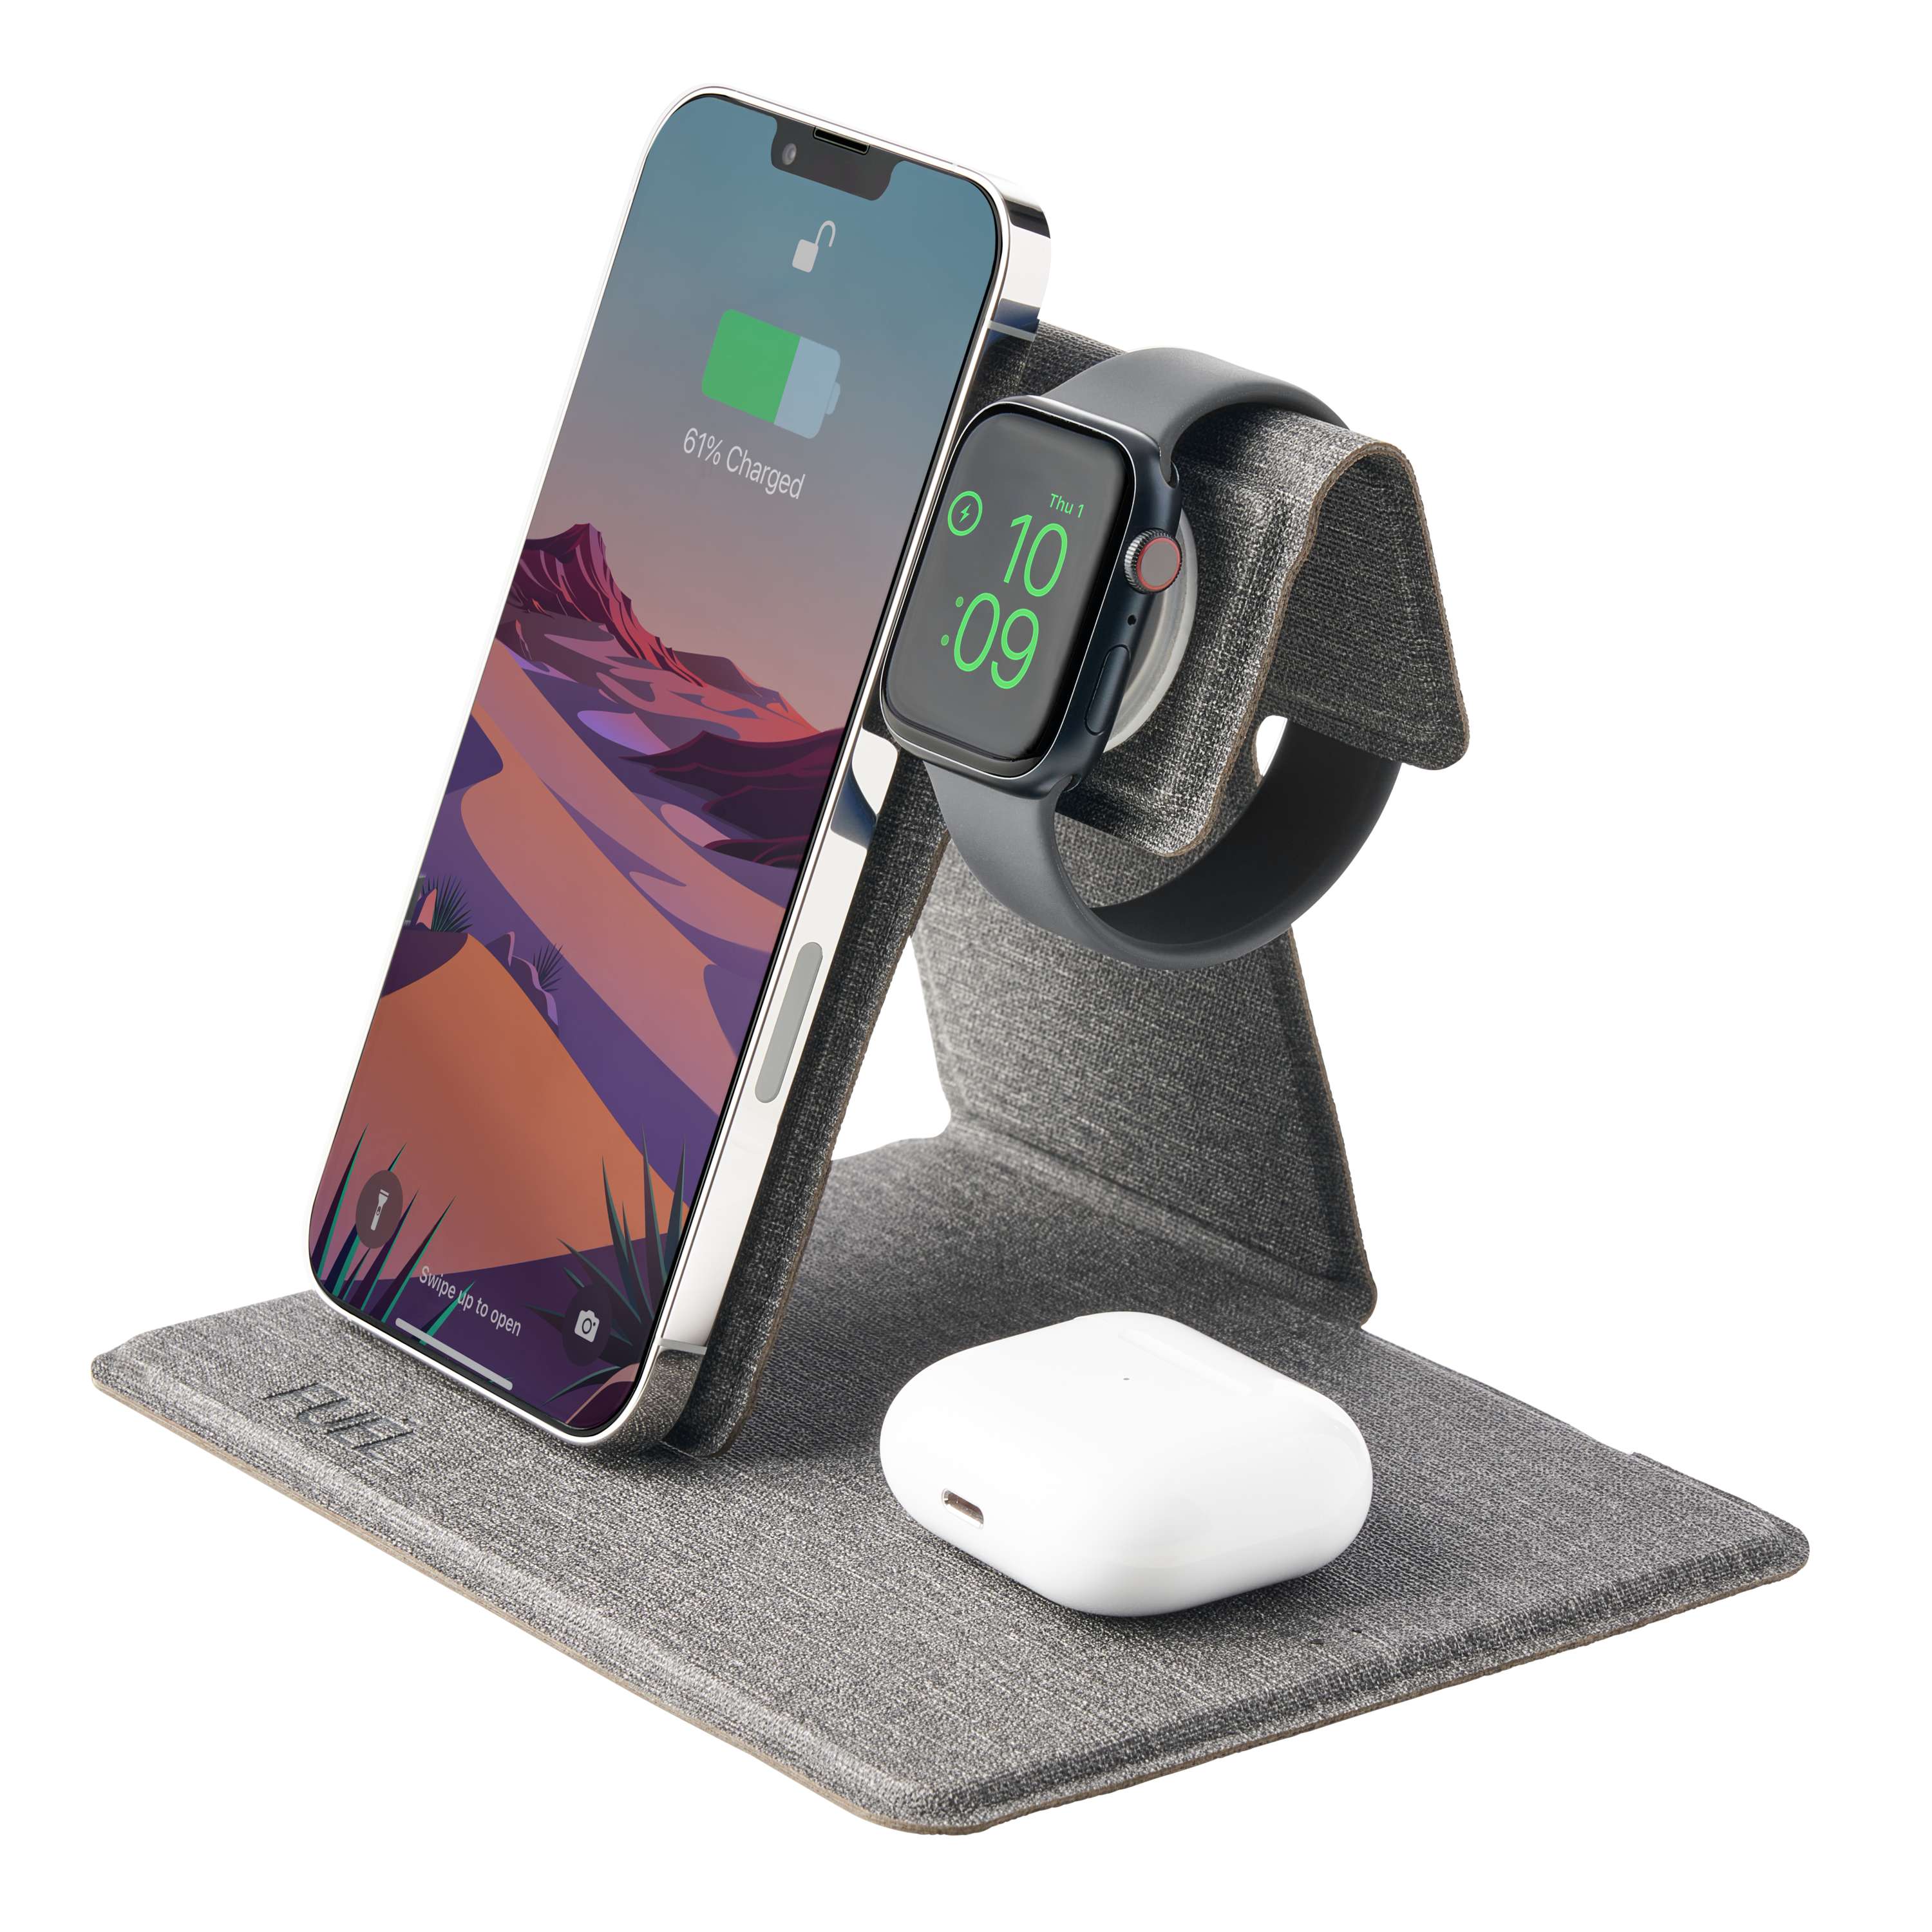 Concrete MagSafe DOCK for iPhone 12